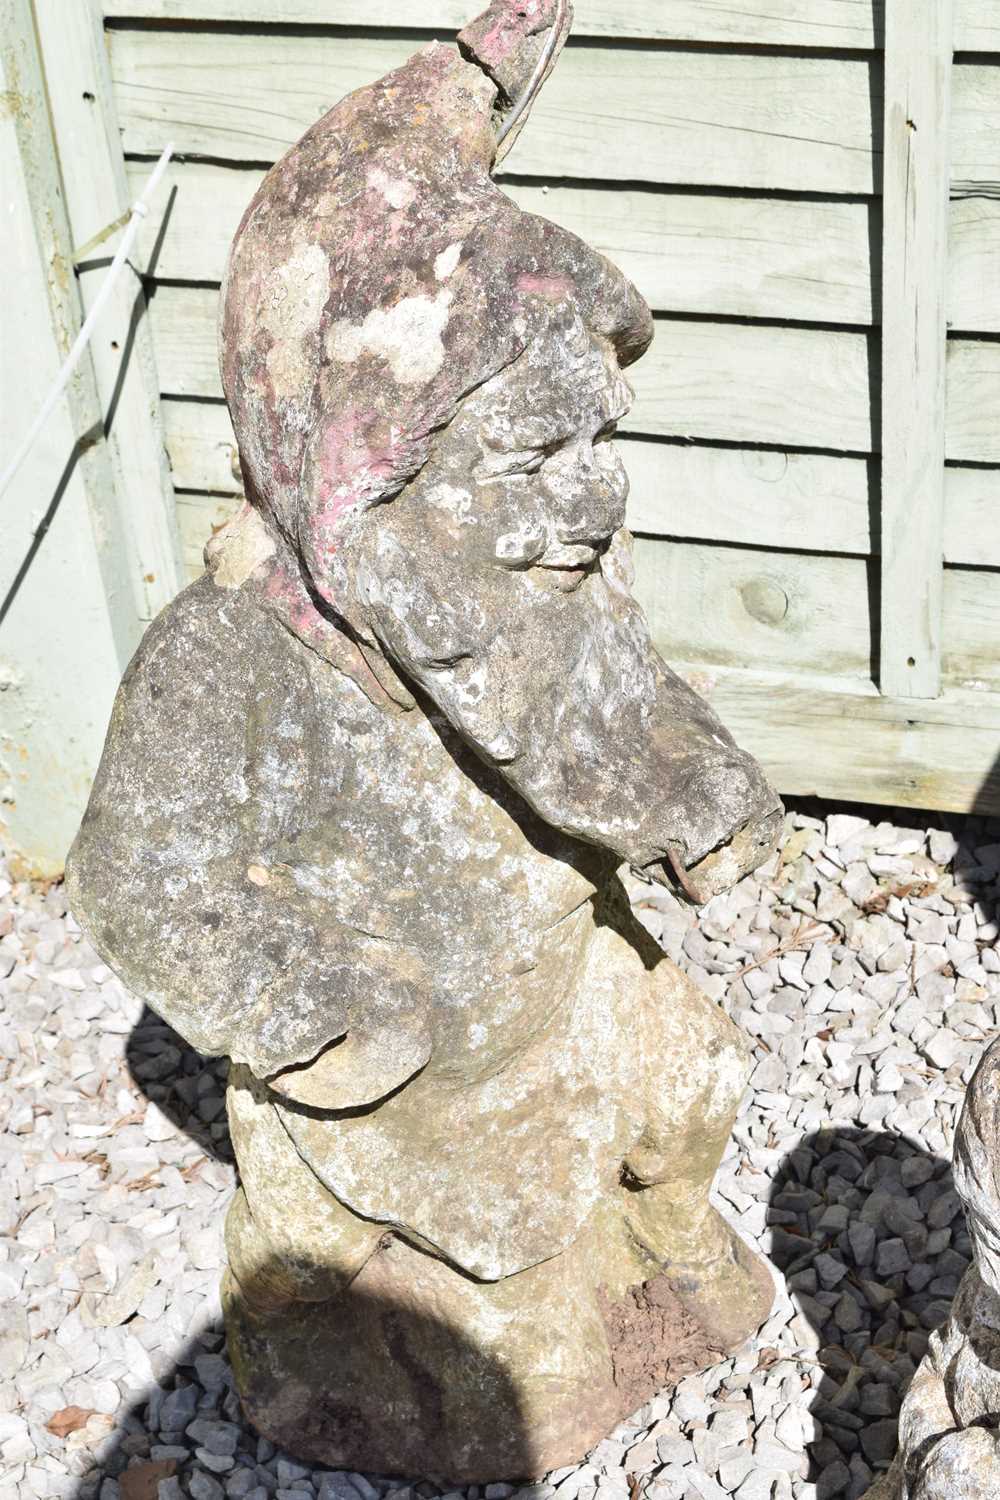 Group of three composition stone garden ornaments of gnomes - Image 5 of 5